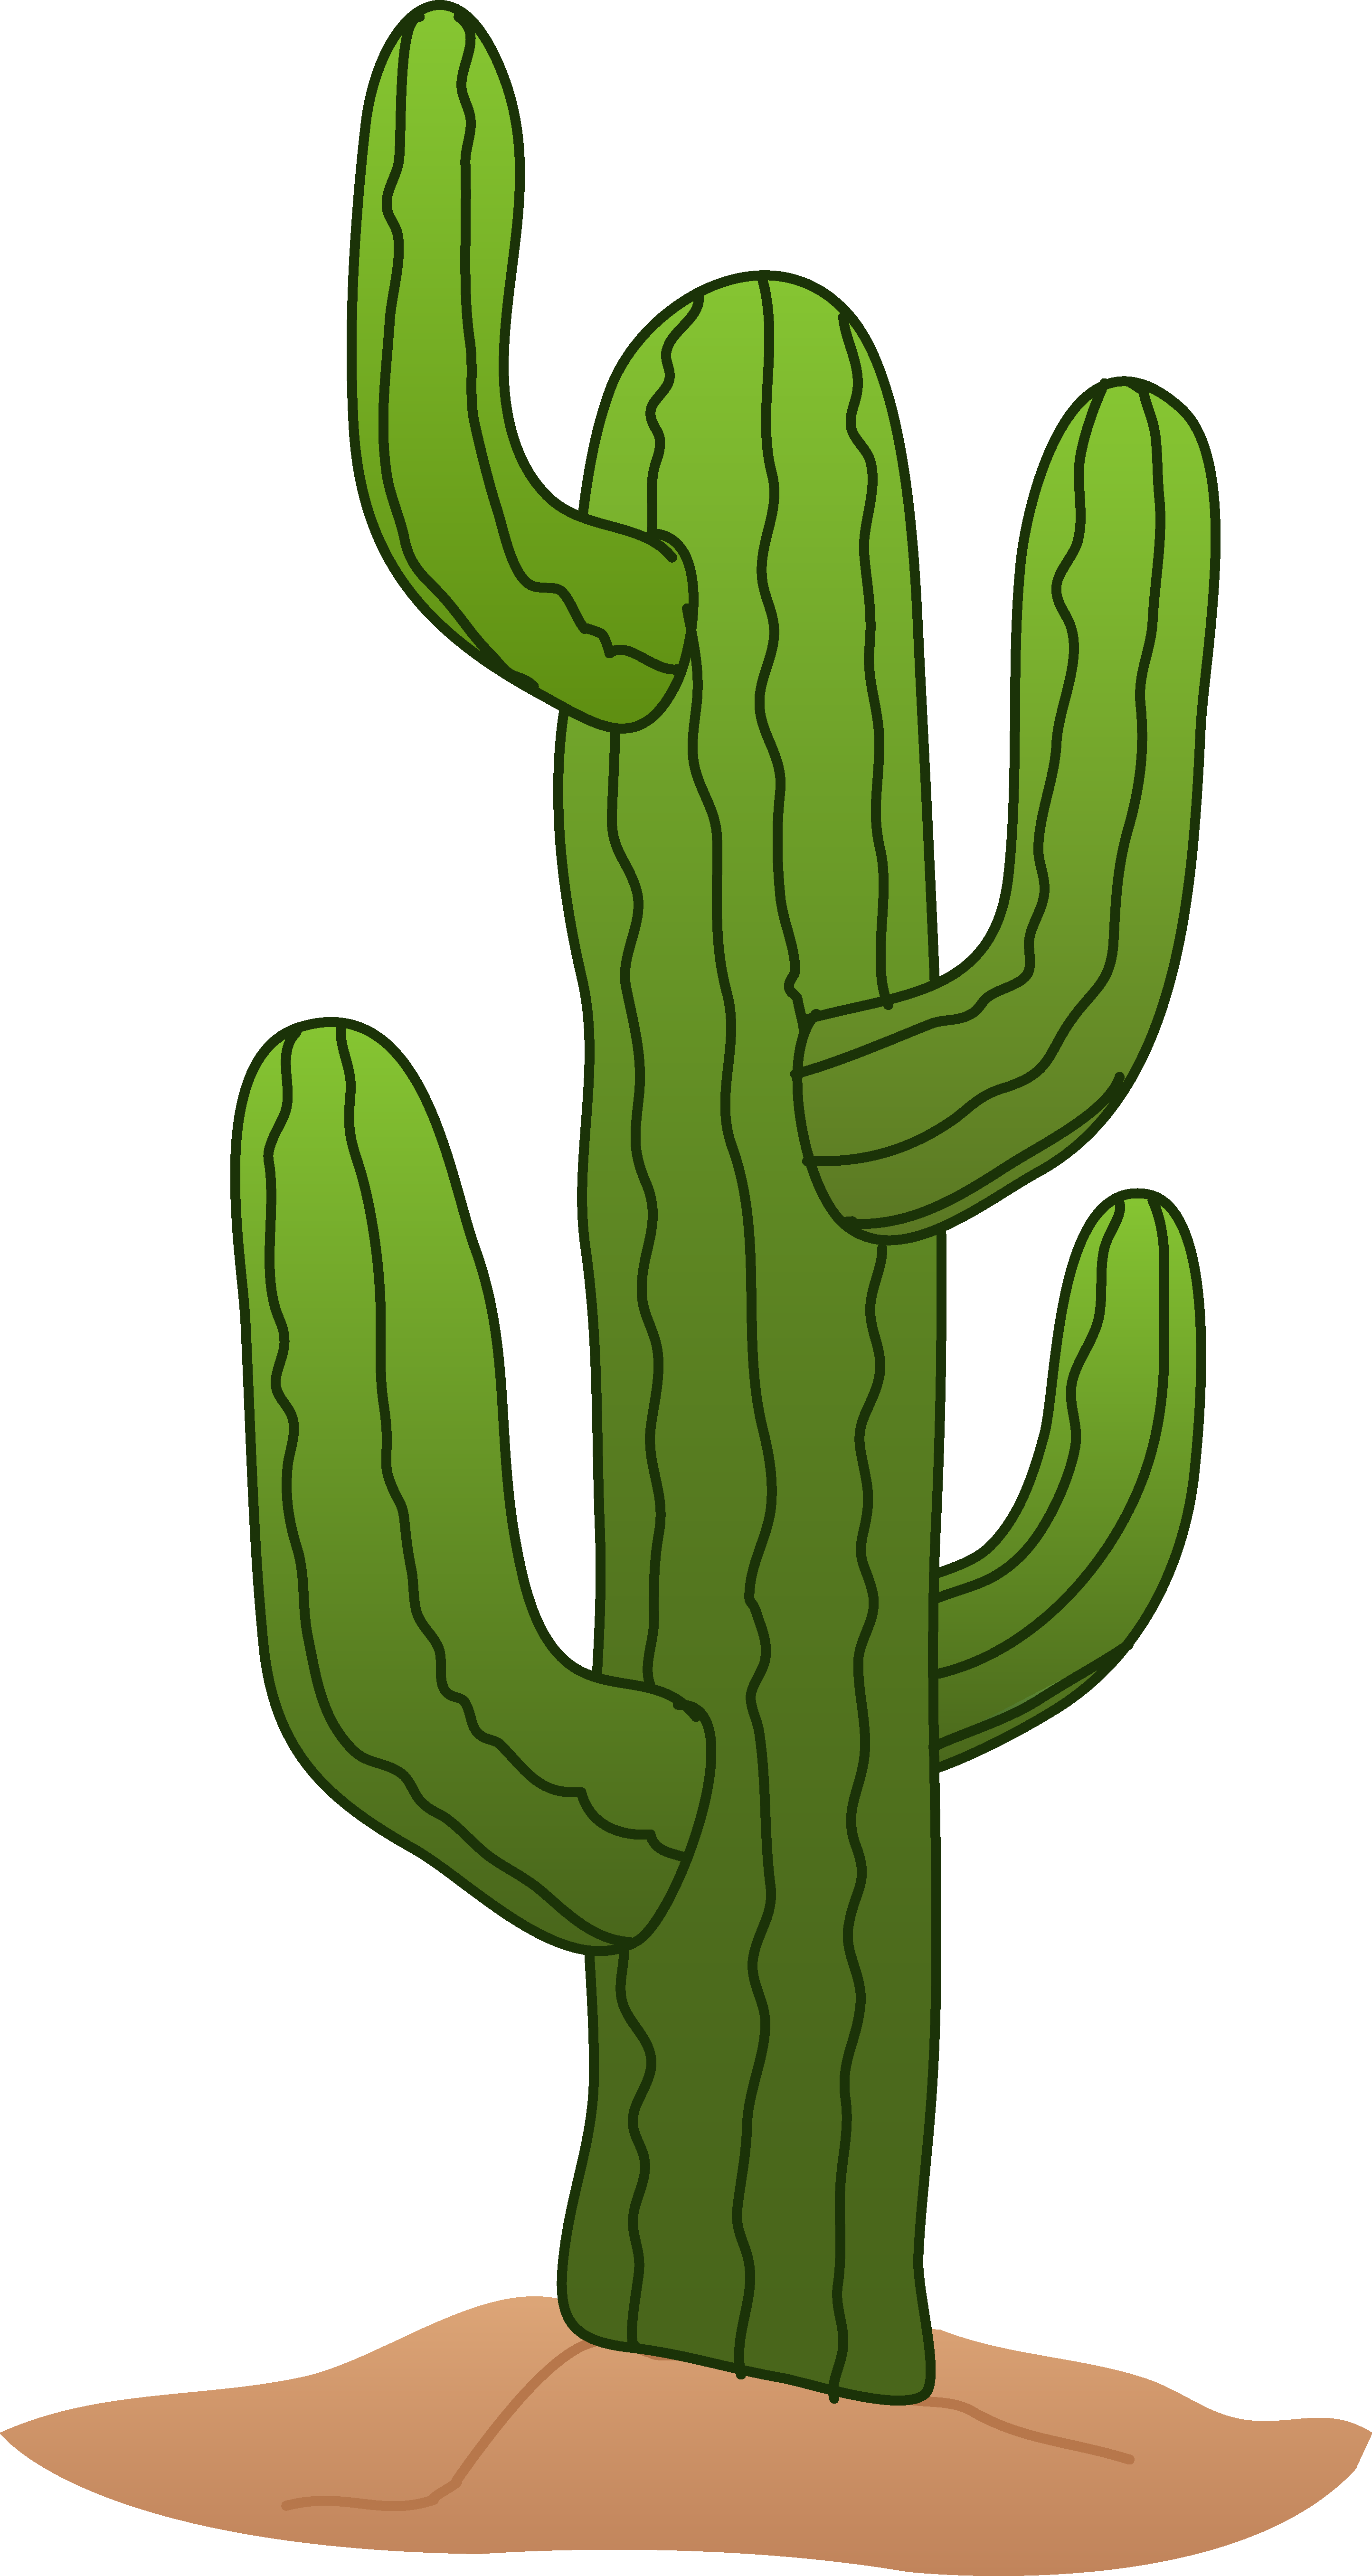 Cactus Images Free - Cliparts.co